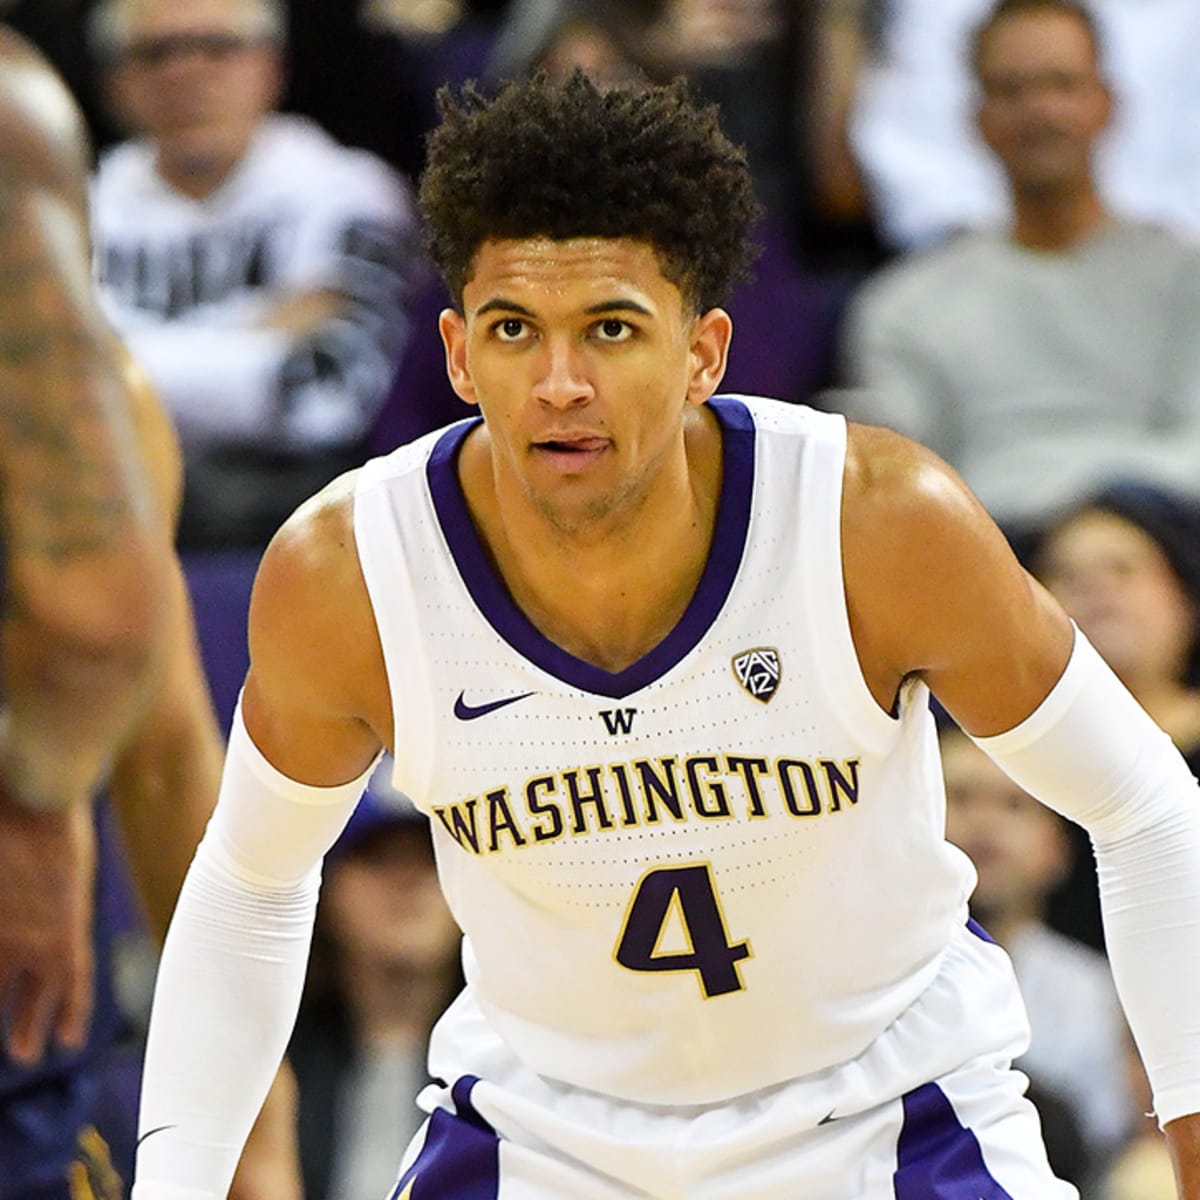 Matisse Thybulle, UW basketball star, has climbed into the national  conversation - Puget Sound Business Journal